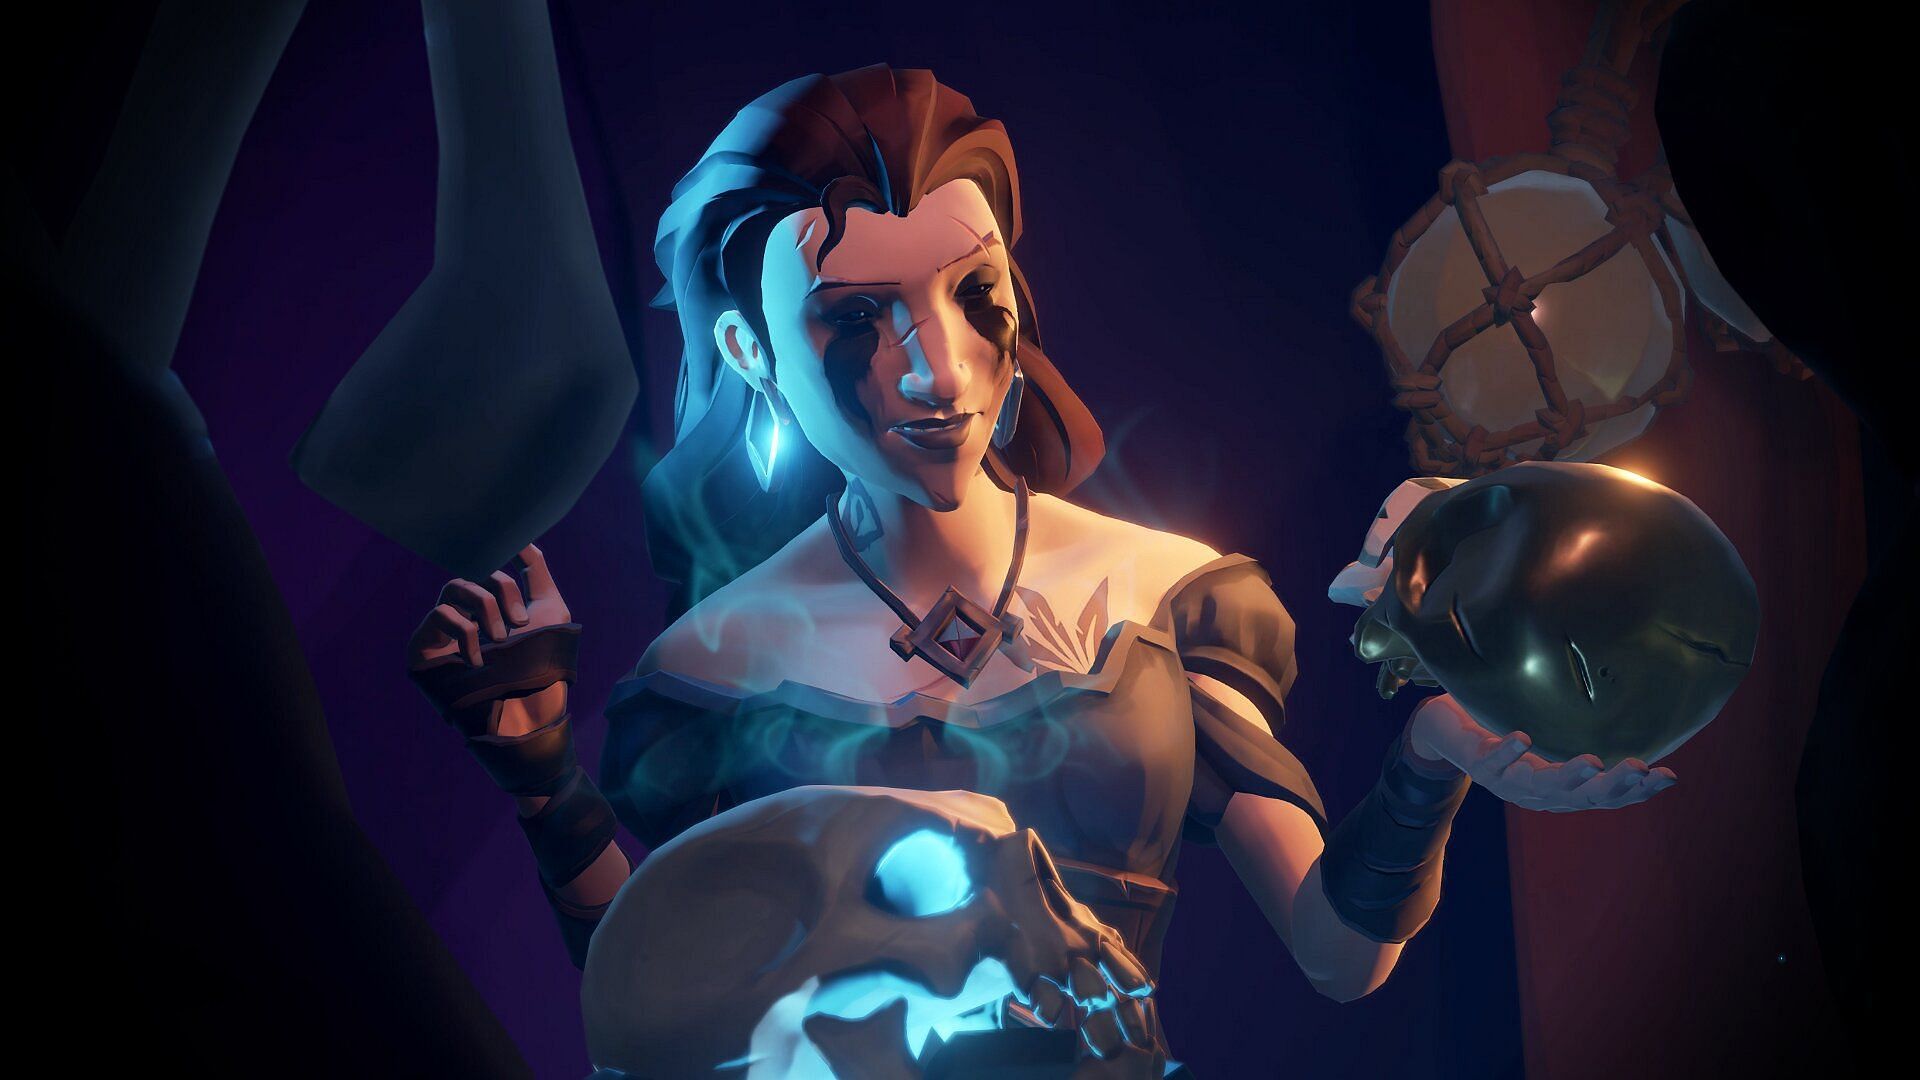 You must distract Madame Olivia to obtain her pocket watch in Sea of Thieves (Image via Rare)